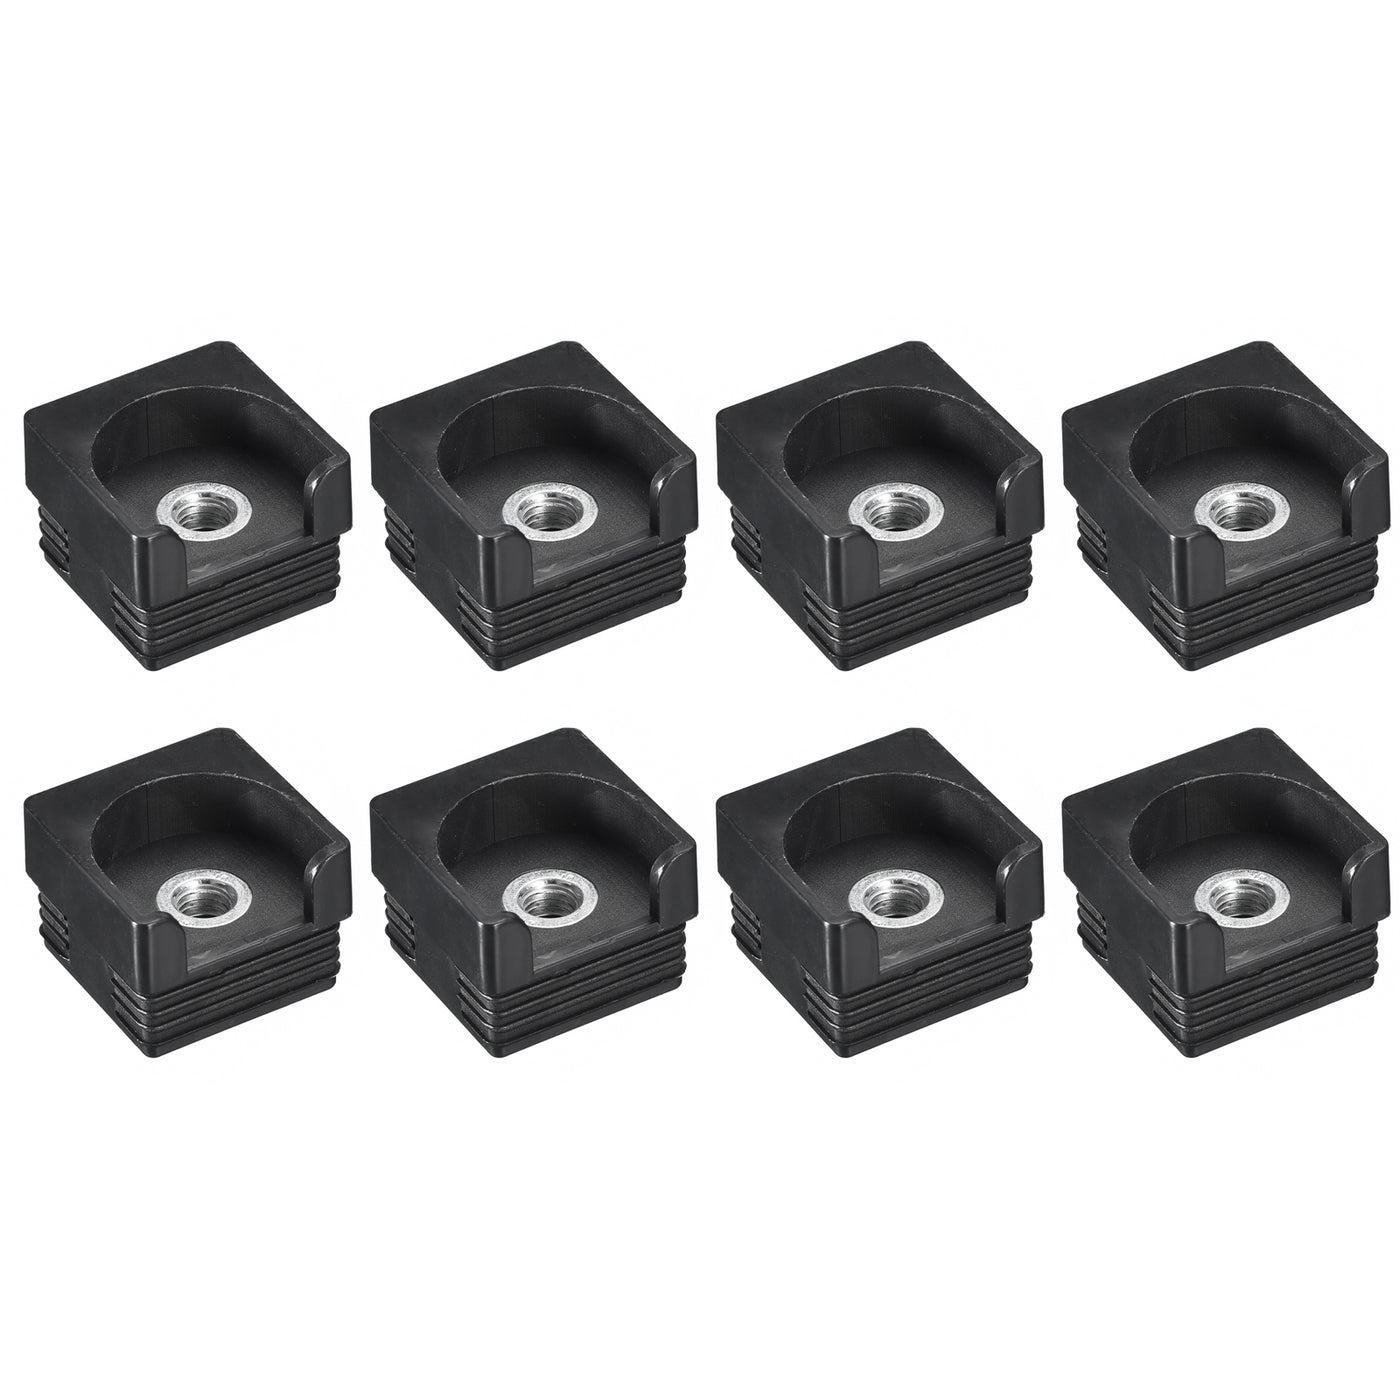 uxcell Uxcell 8Pcs 1.57"x1.57" Caster Insert with Thread, Square M10 Thread for Furniture